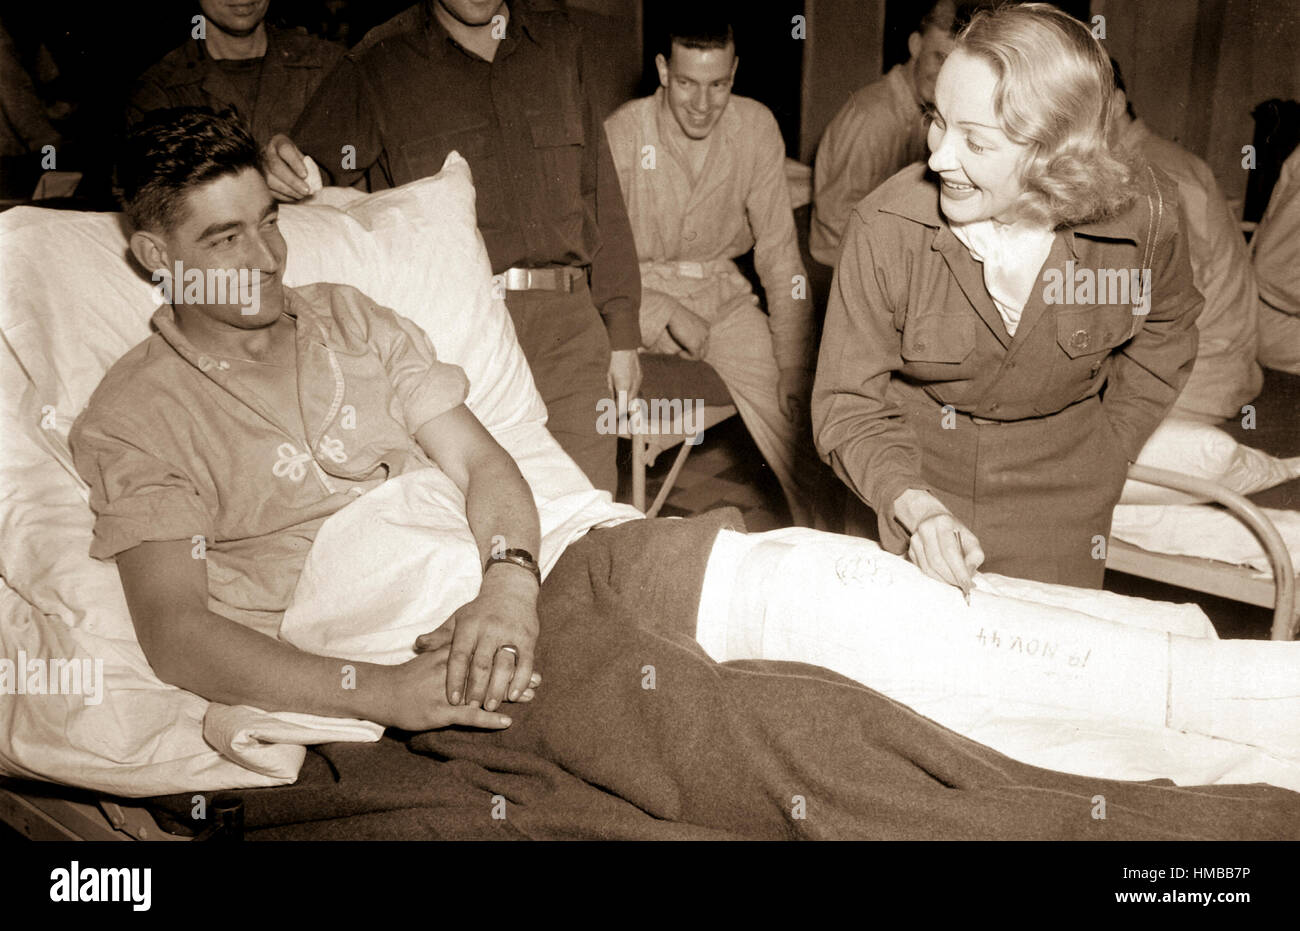 Marlene Dietrich, motion picture actress, autographs the cast on the leg of Tec 4 Earl D. McFarland of Cavider, Texas, at a United States hospital in Belgium, where she has been entertaining the GIs.  November 24, 1944. Tuttle. (Army) NARA FILE #:  111-SC-232989 WAR & CONFLICT #:  758 Stock Photo